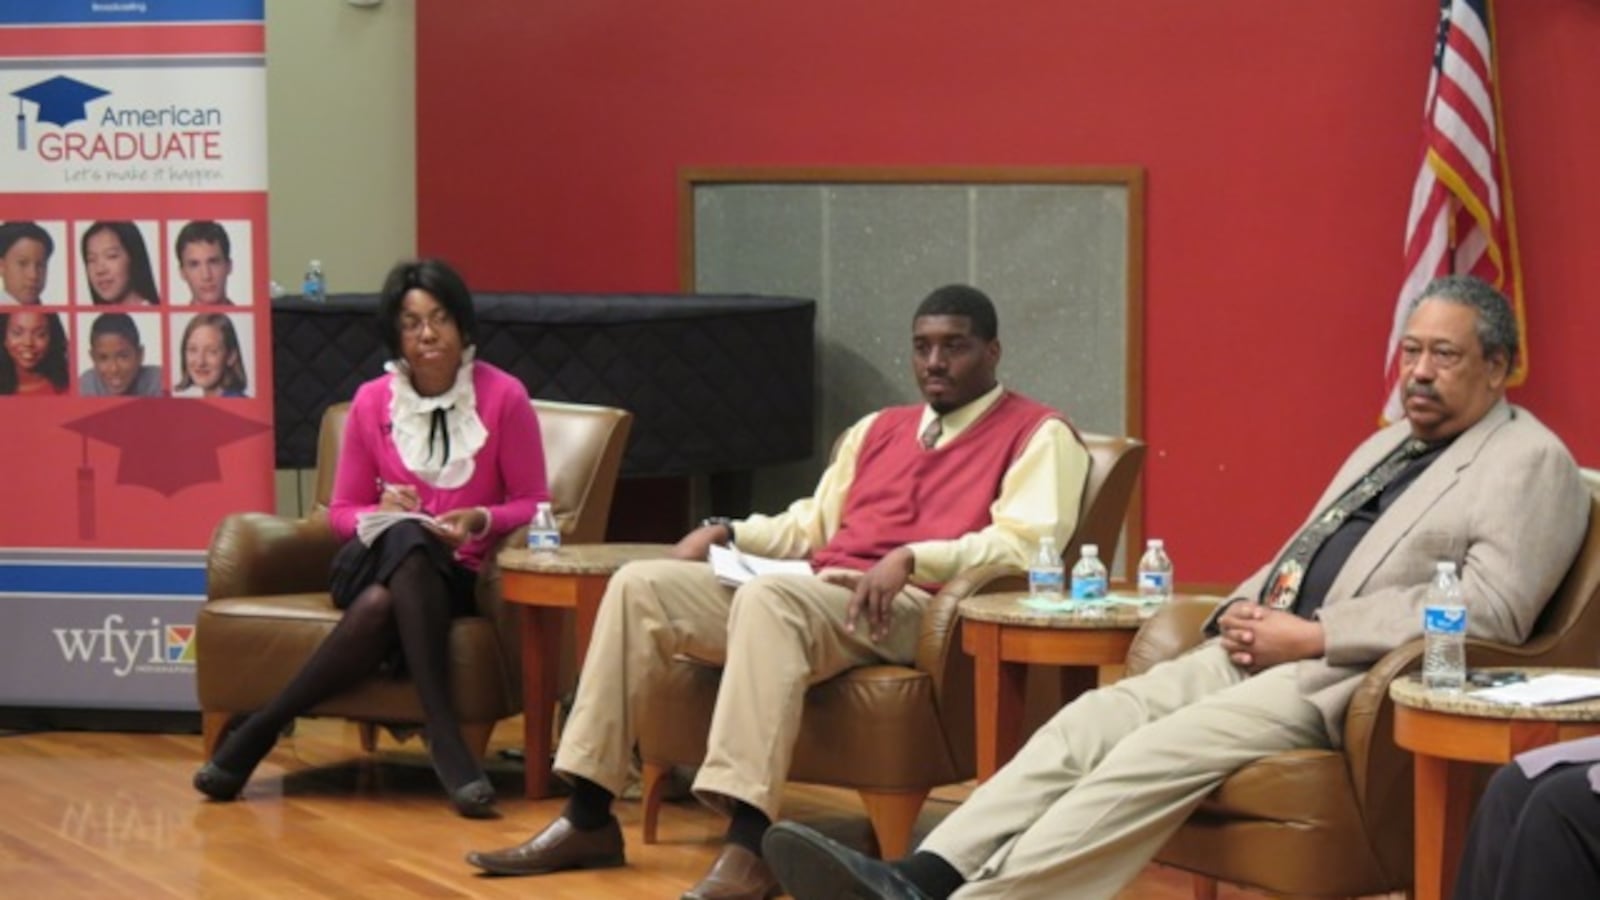 IPS school board candidates discuss education issues at Chalkbeat and WFYI's election forum.